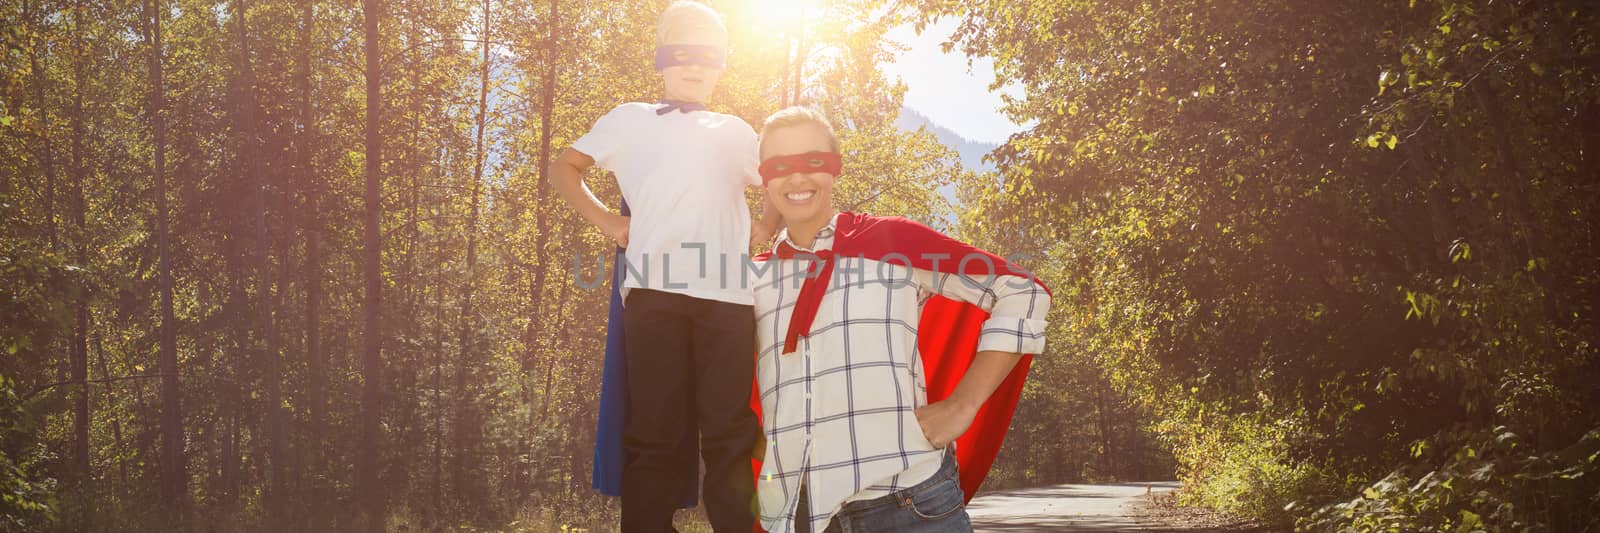 Mother and son pretending to be superhero against road passing through forest